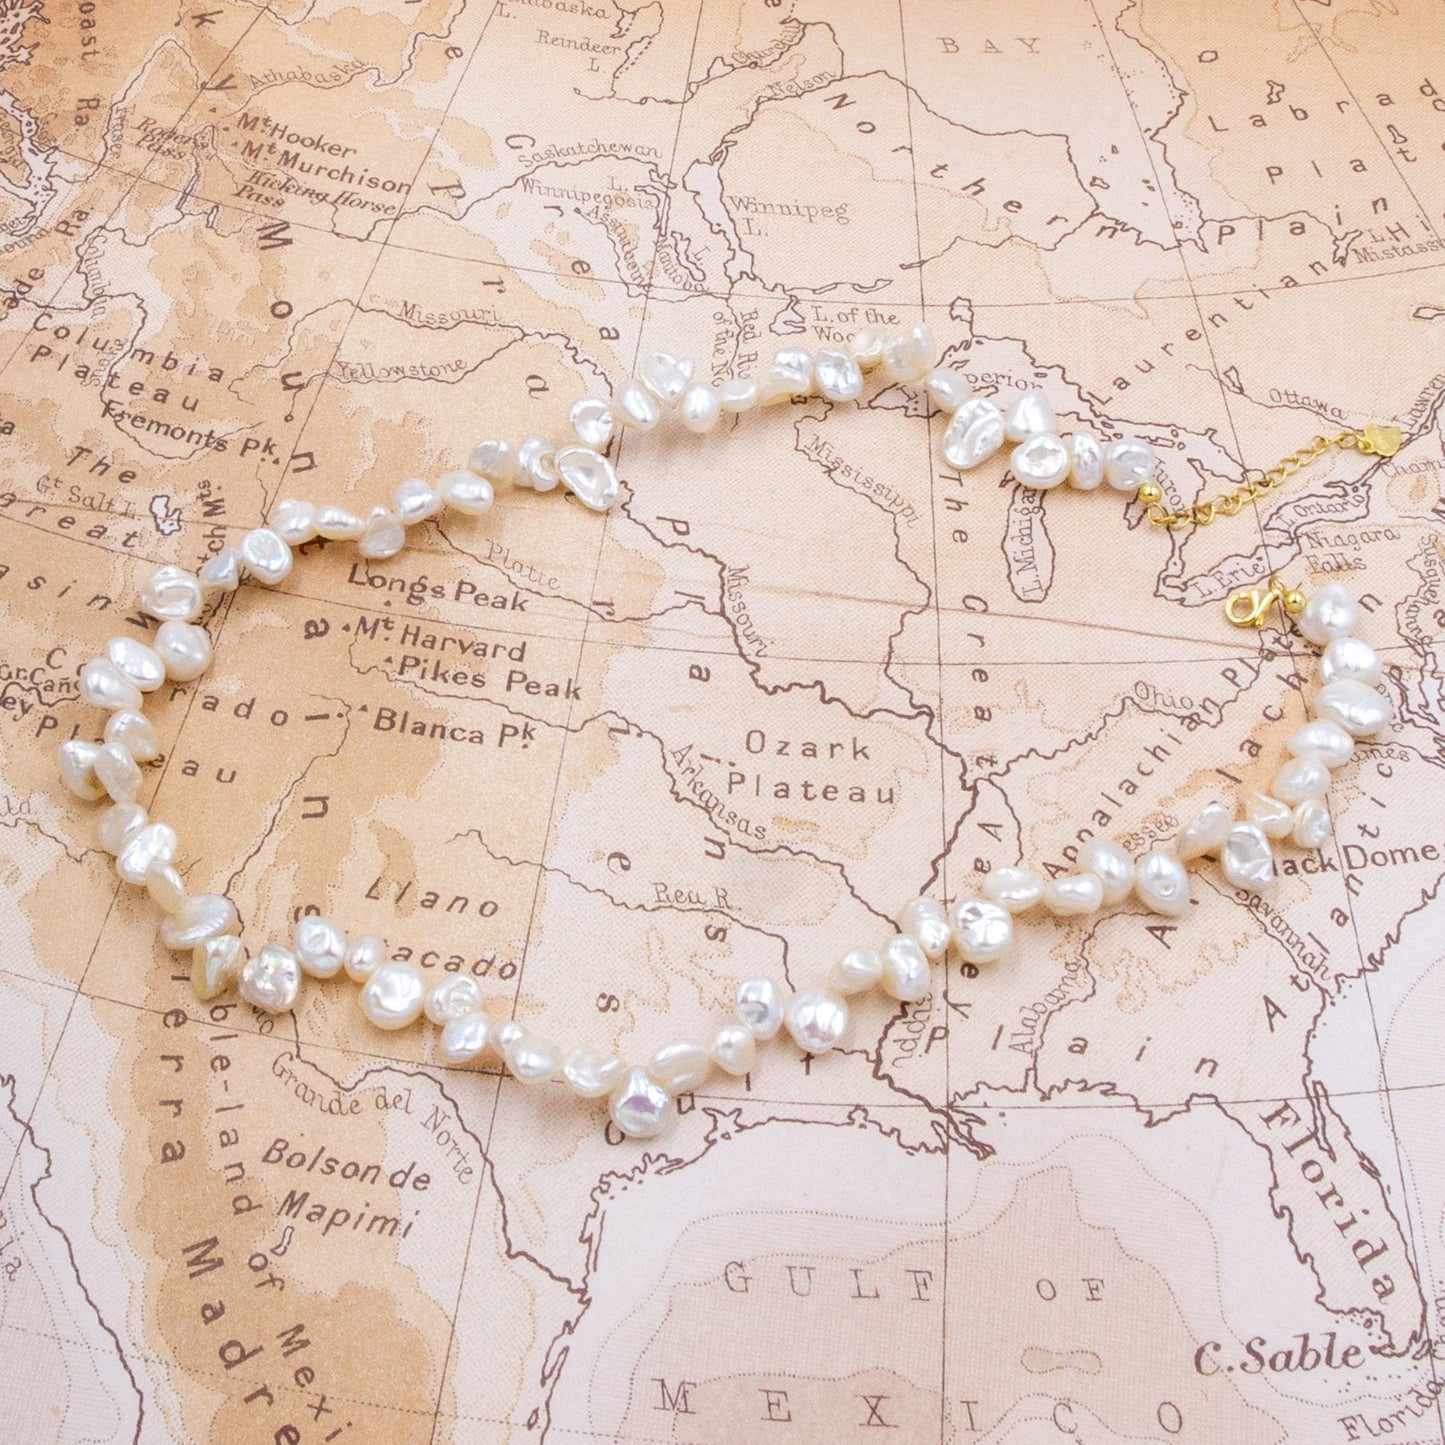 Cheekoo's Handcrafted Freshwater White Keshi Pearl Strand Gold Necklace, 6-10 mm Pearls, 15-17" Strand